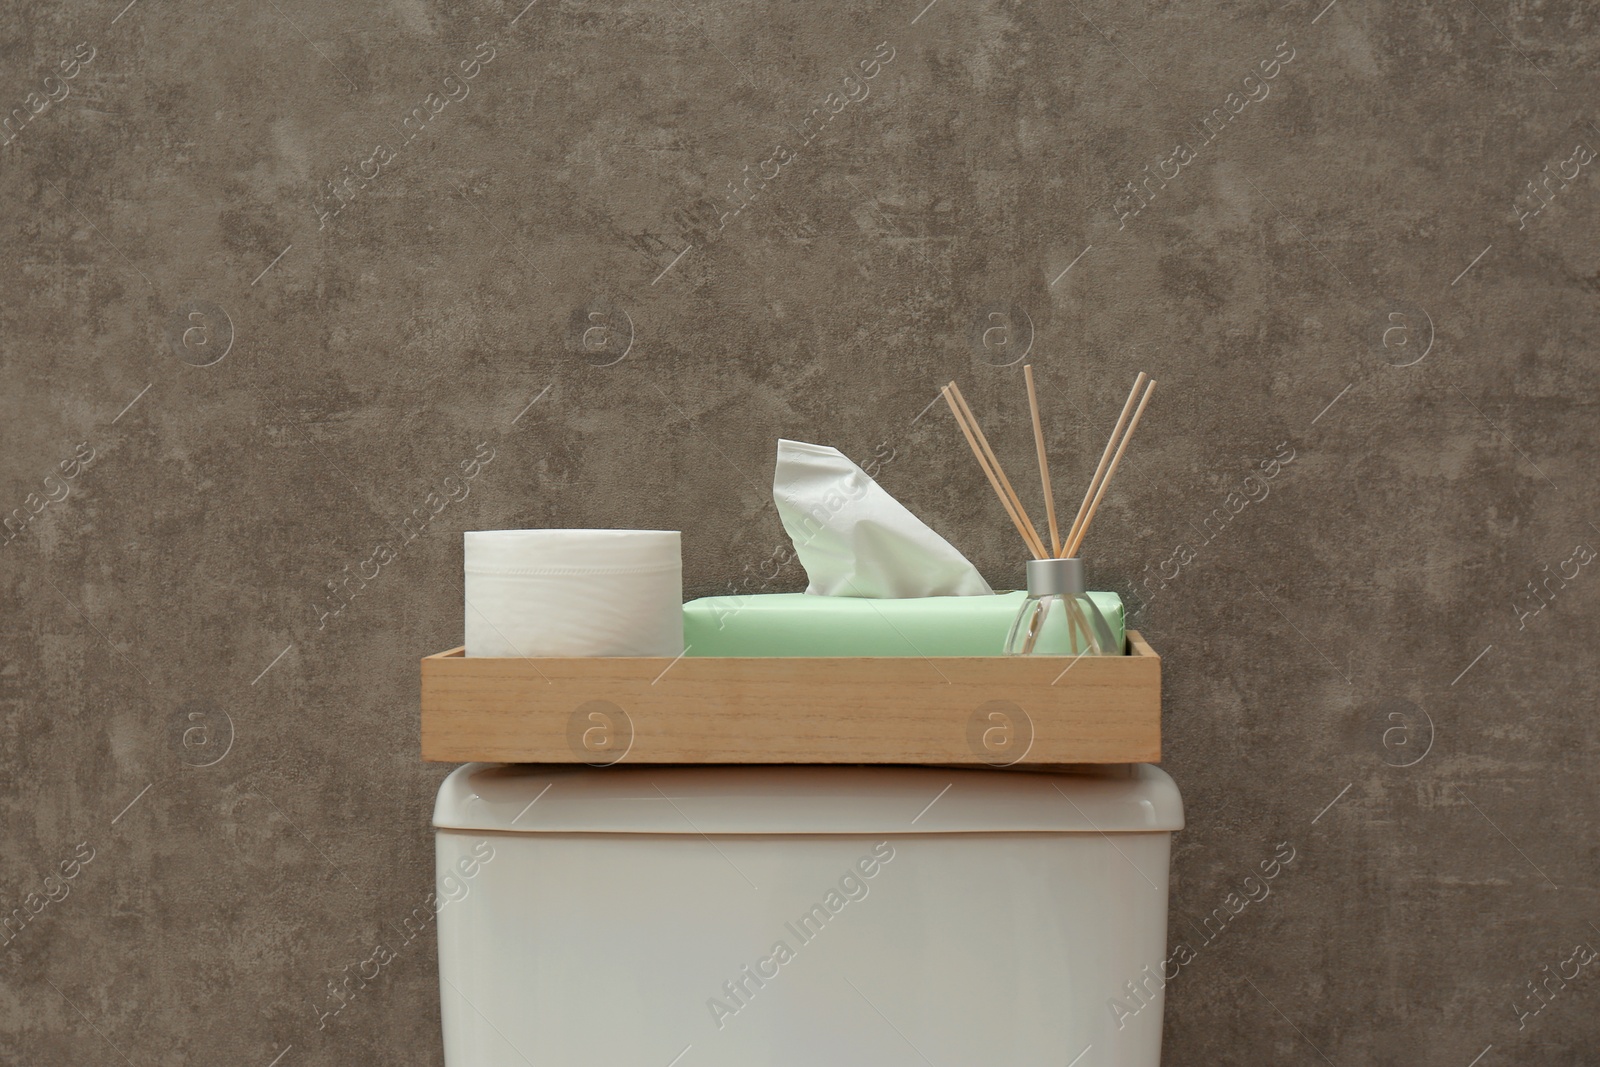 Photo of Tray with roll of paper, napkins and reed air freshener on toilet tank near grey wall. Bathroom interior